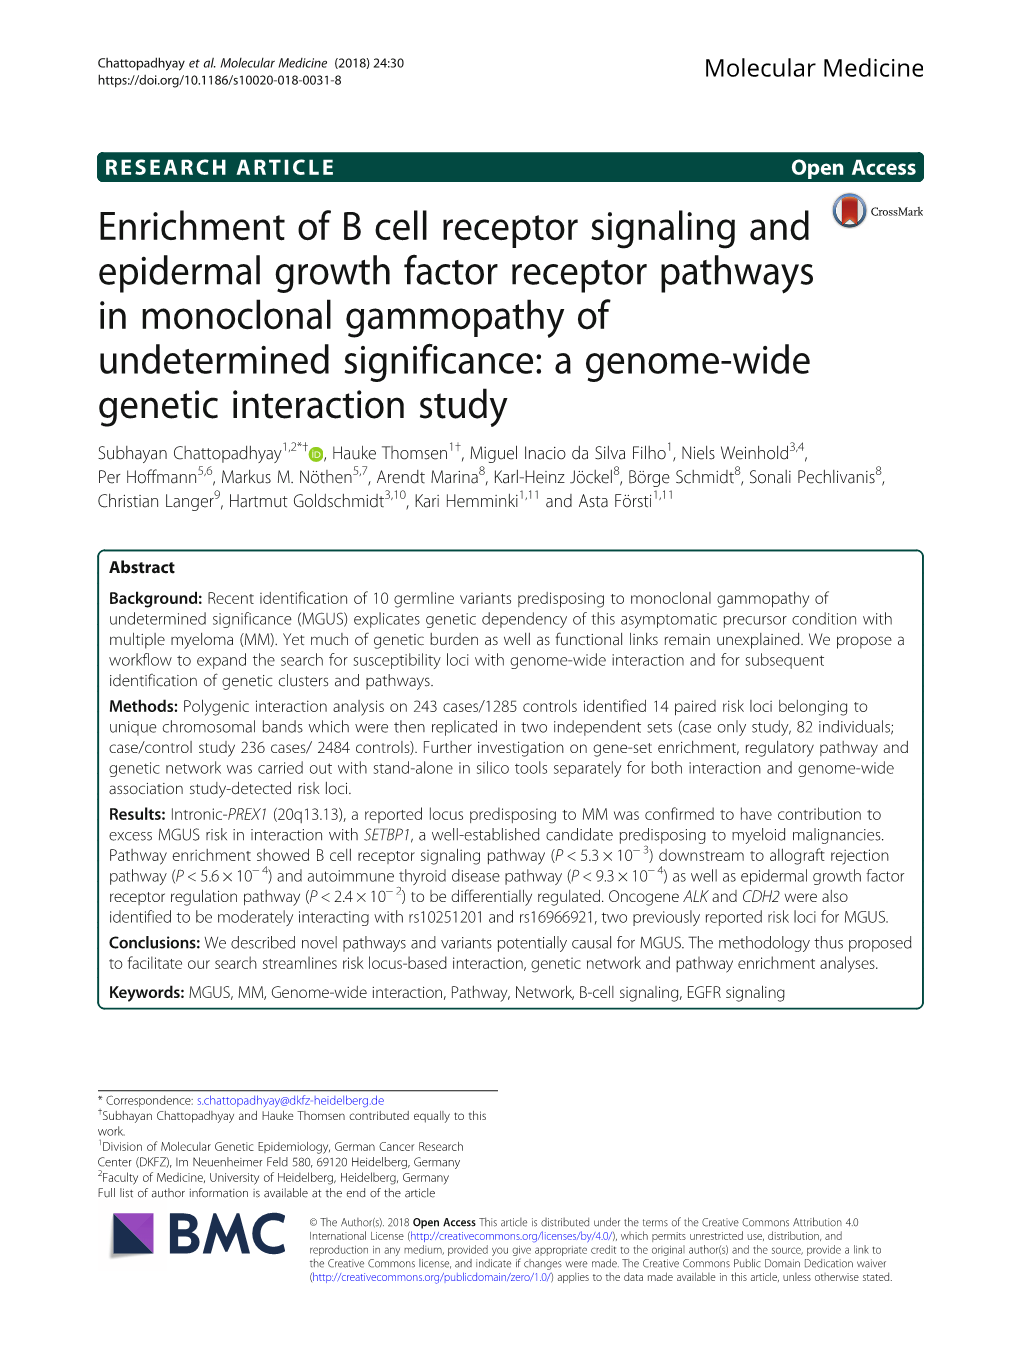 Enrichment of B Cell Receptor Signaling and Epidermal Growth Factor Receptor Pathways in Monoclonal Gammopathy of Undetermined S